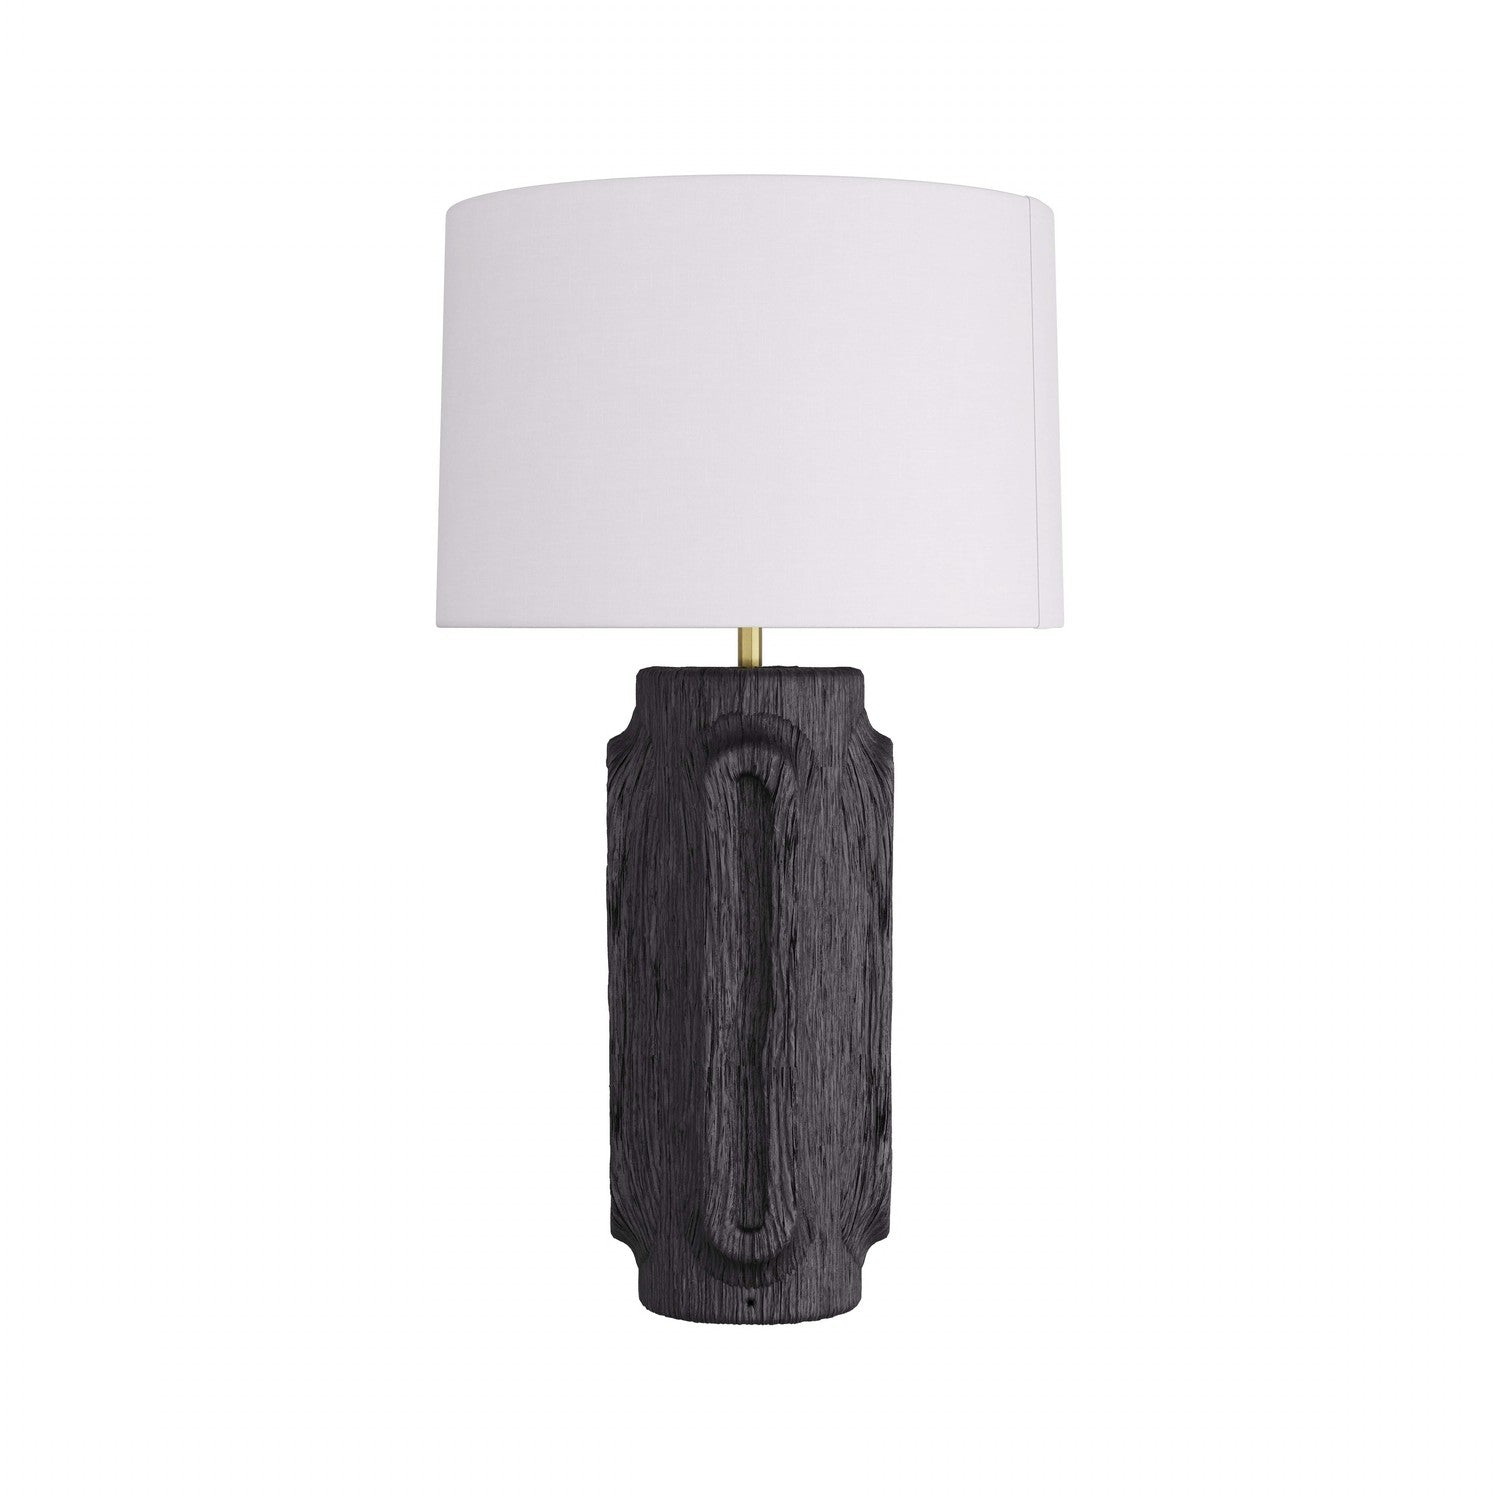 One Light Table Lamp from the Taika collection in Ebony finish